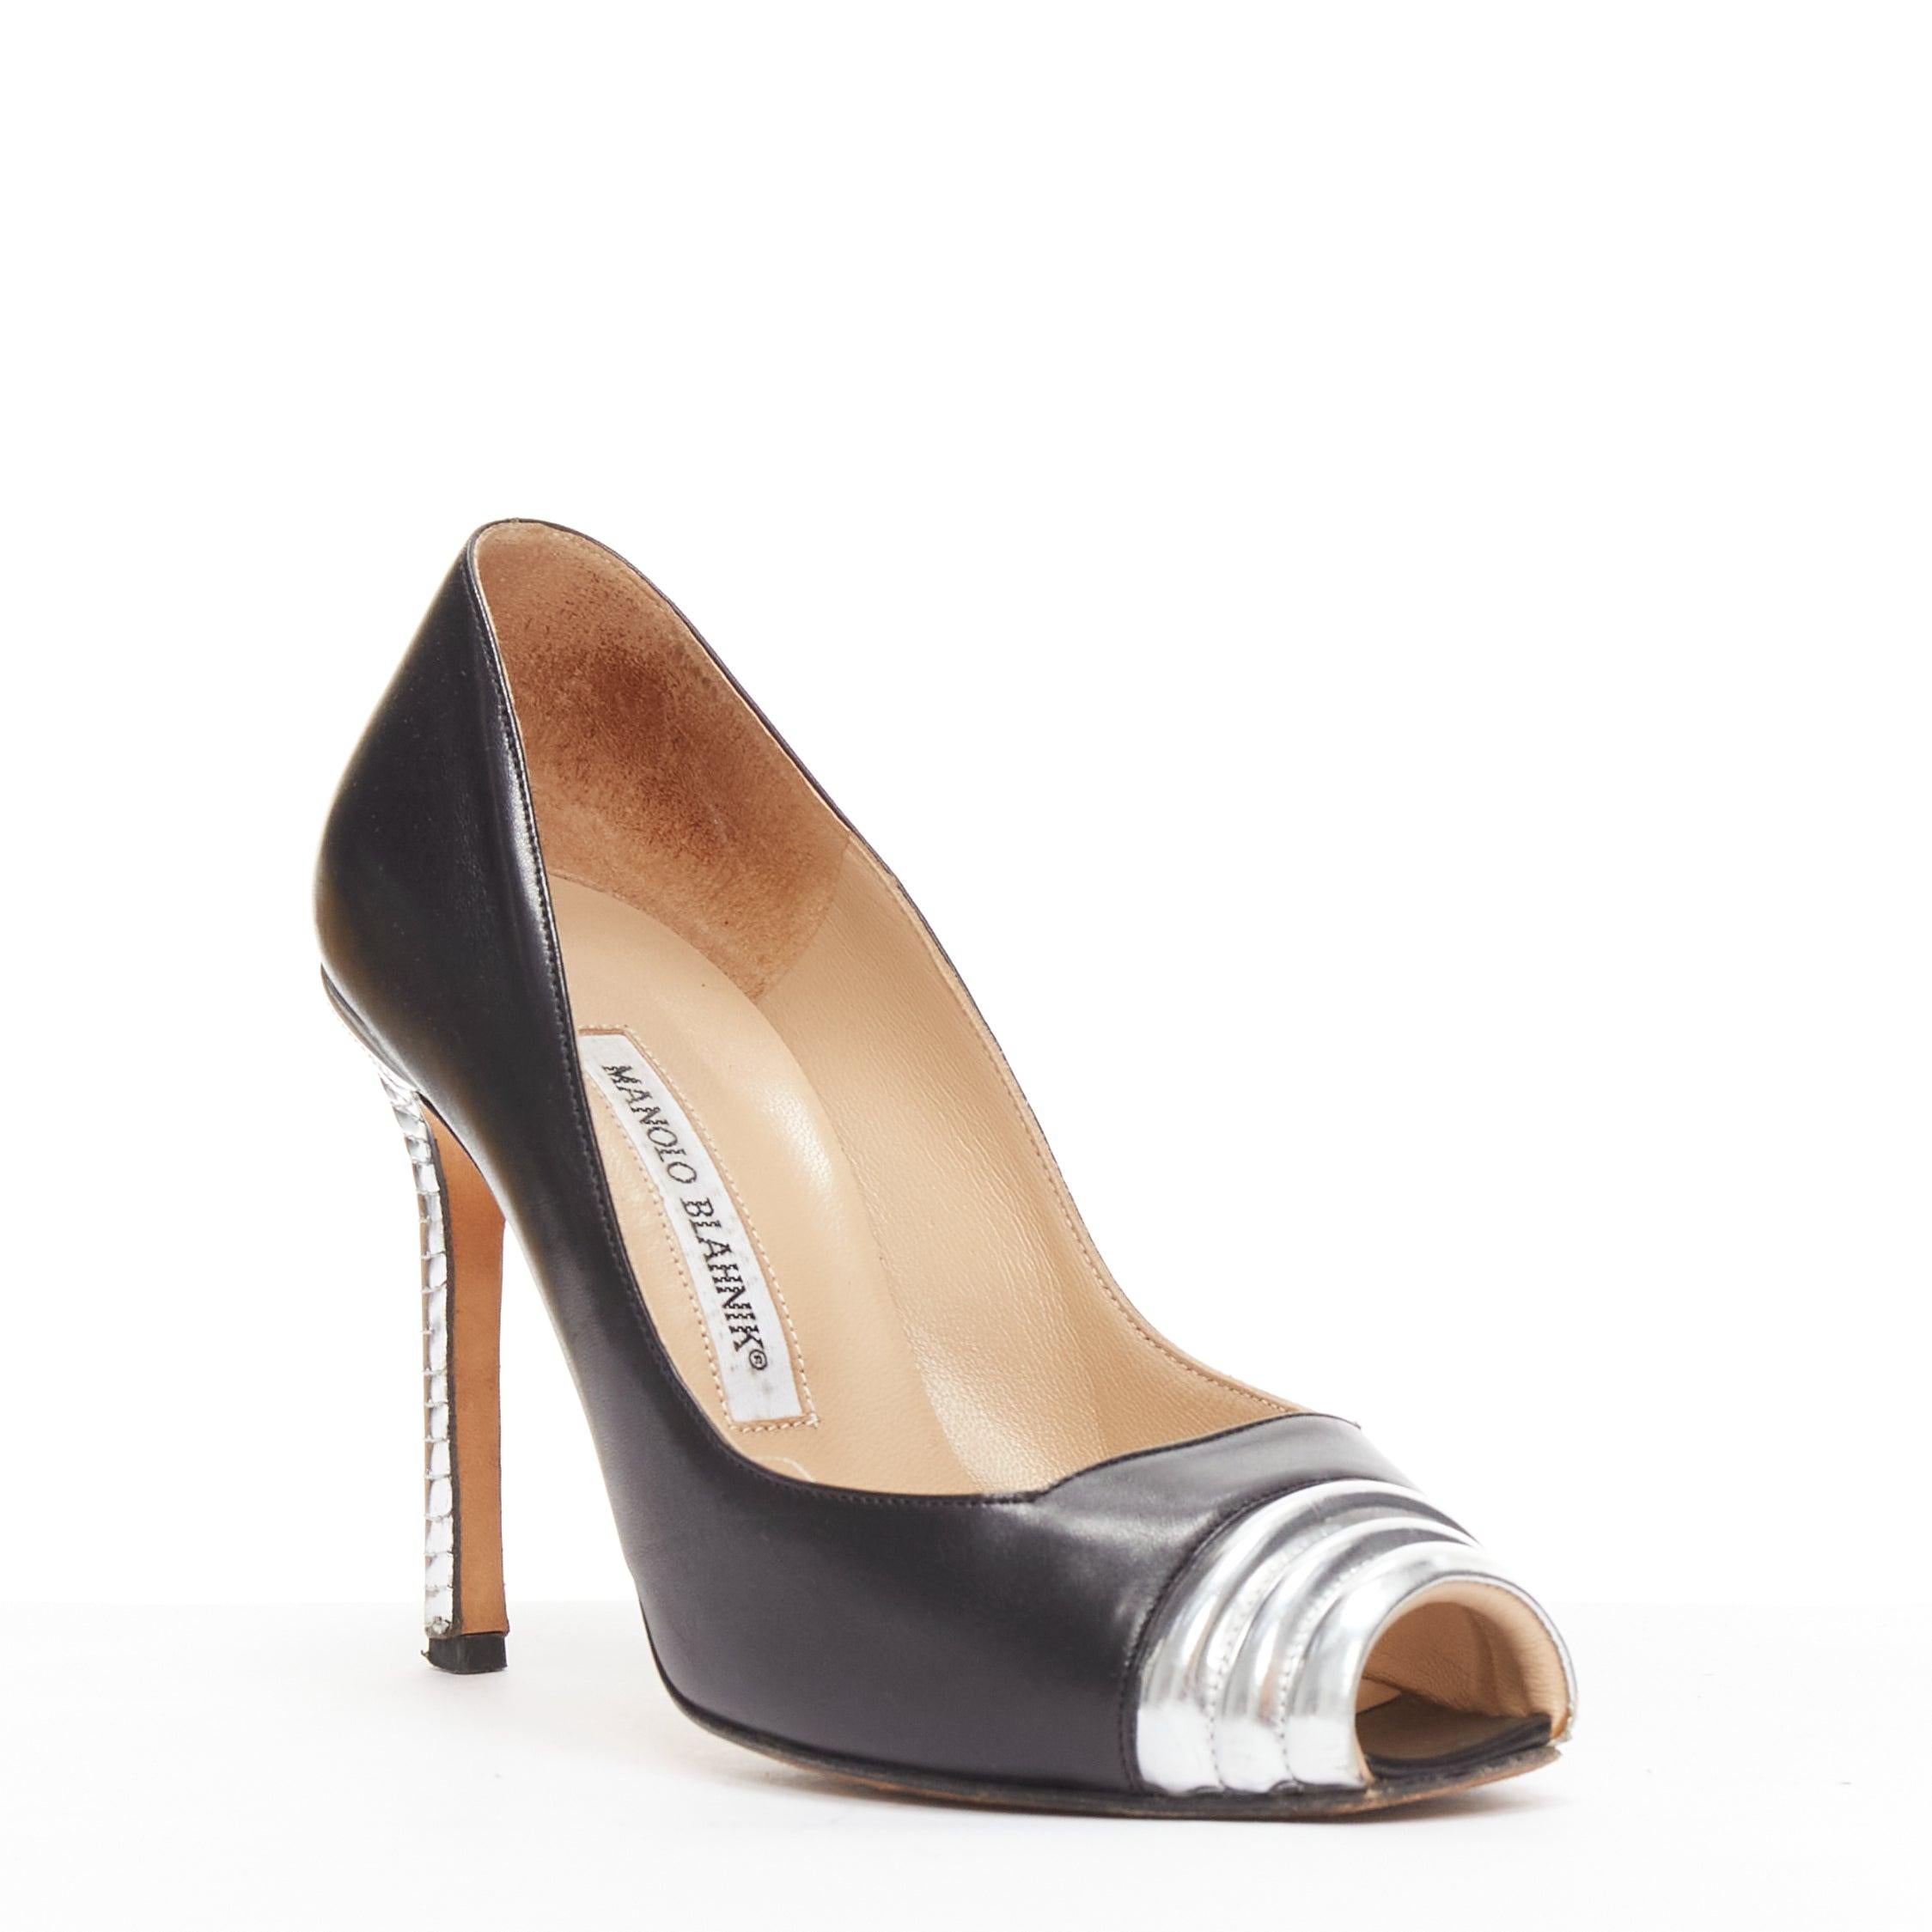 MANOLO BLAHNIK black leather silver quilted blunt peep toe pumps EU37
Reference: LNKO/A02290
Brand: Manolo Blahnik
Material: Leather
Color: Black, Silver
Pattern: Solid
Closure: Slip On
Lining: Nude Leather
Extra Details: Silver quilted heels.
Made